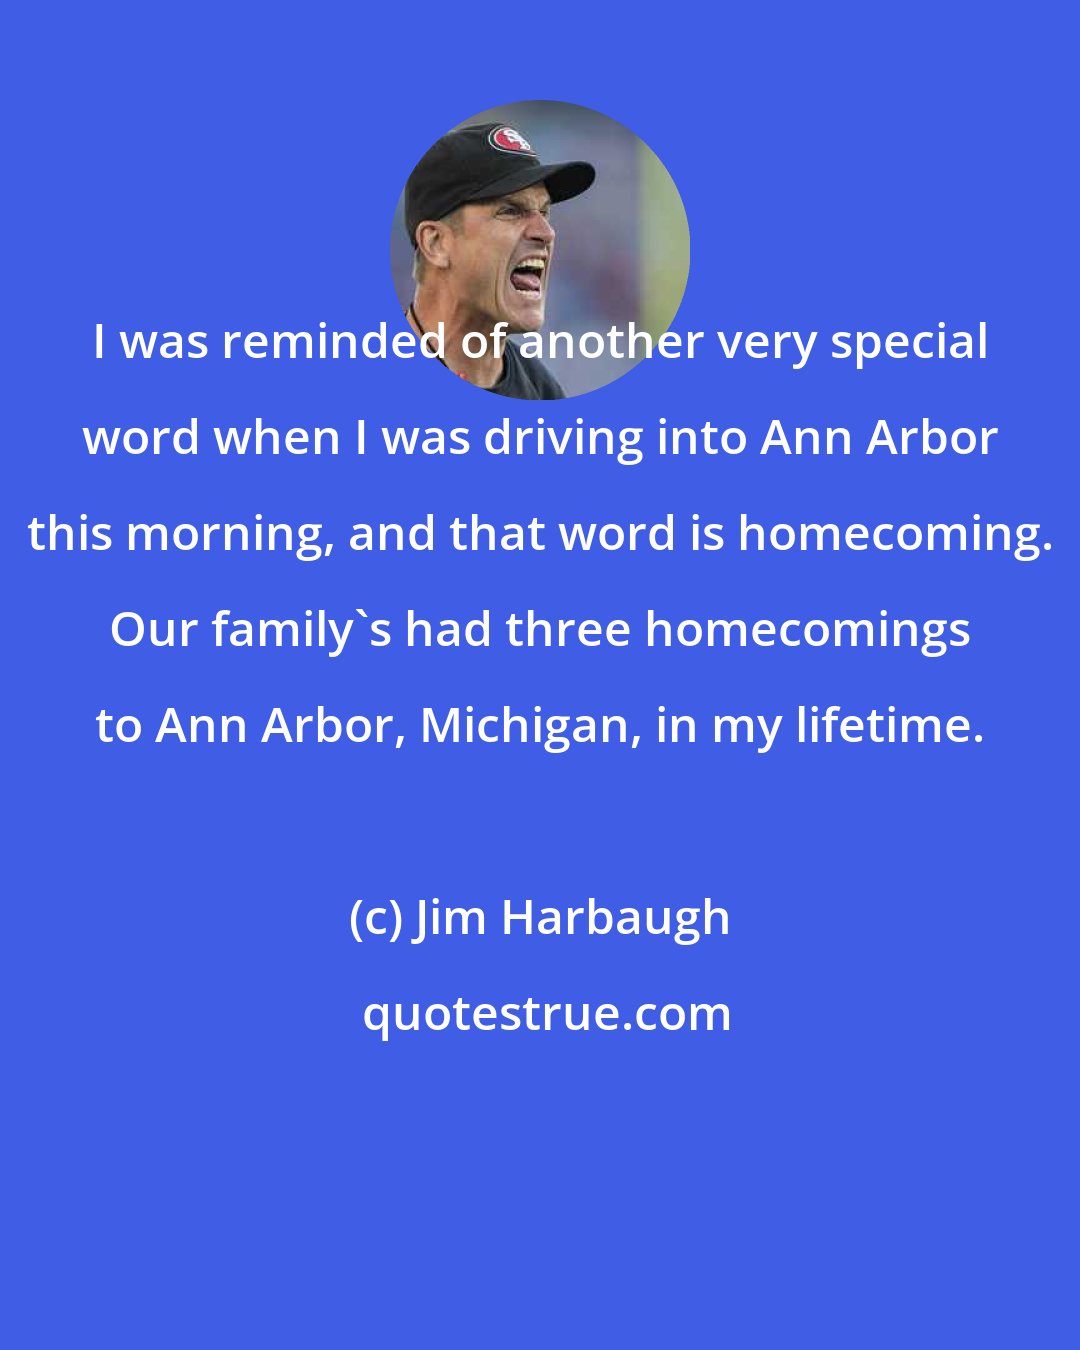 Jim Harbaugh: I was reminded of another very special word when I was driving into Ann Arbor this morning, and that word is homecoming. Our family's had three homecomings to Ann Arbor, Michigan, in my lifetime.